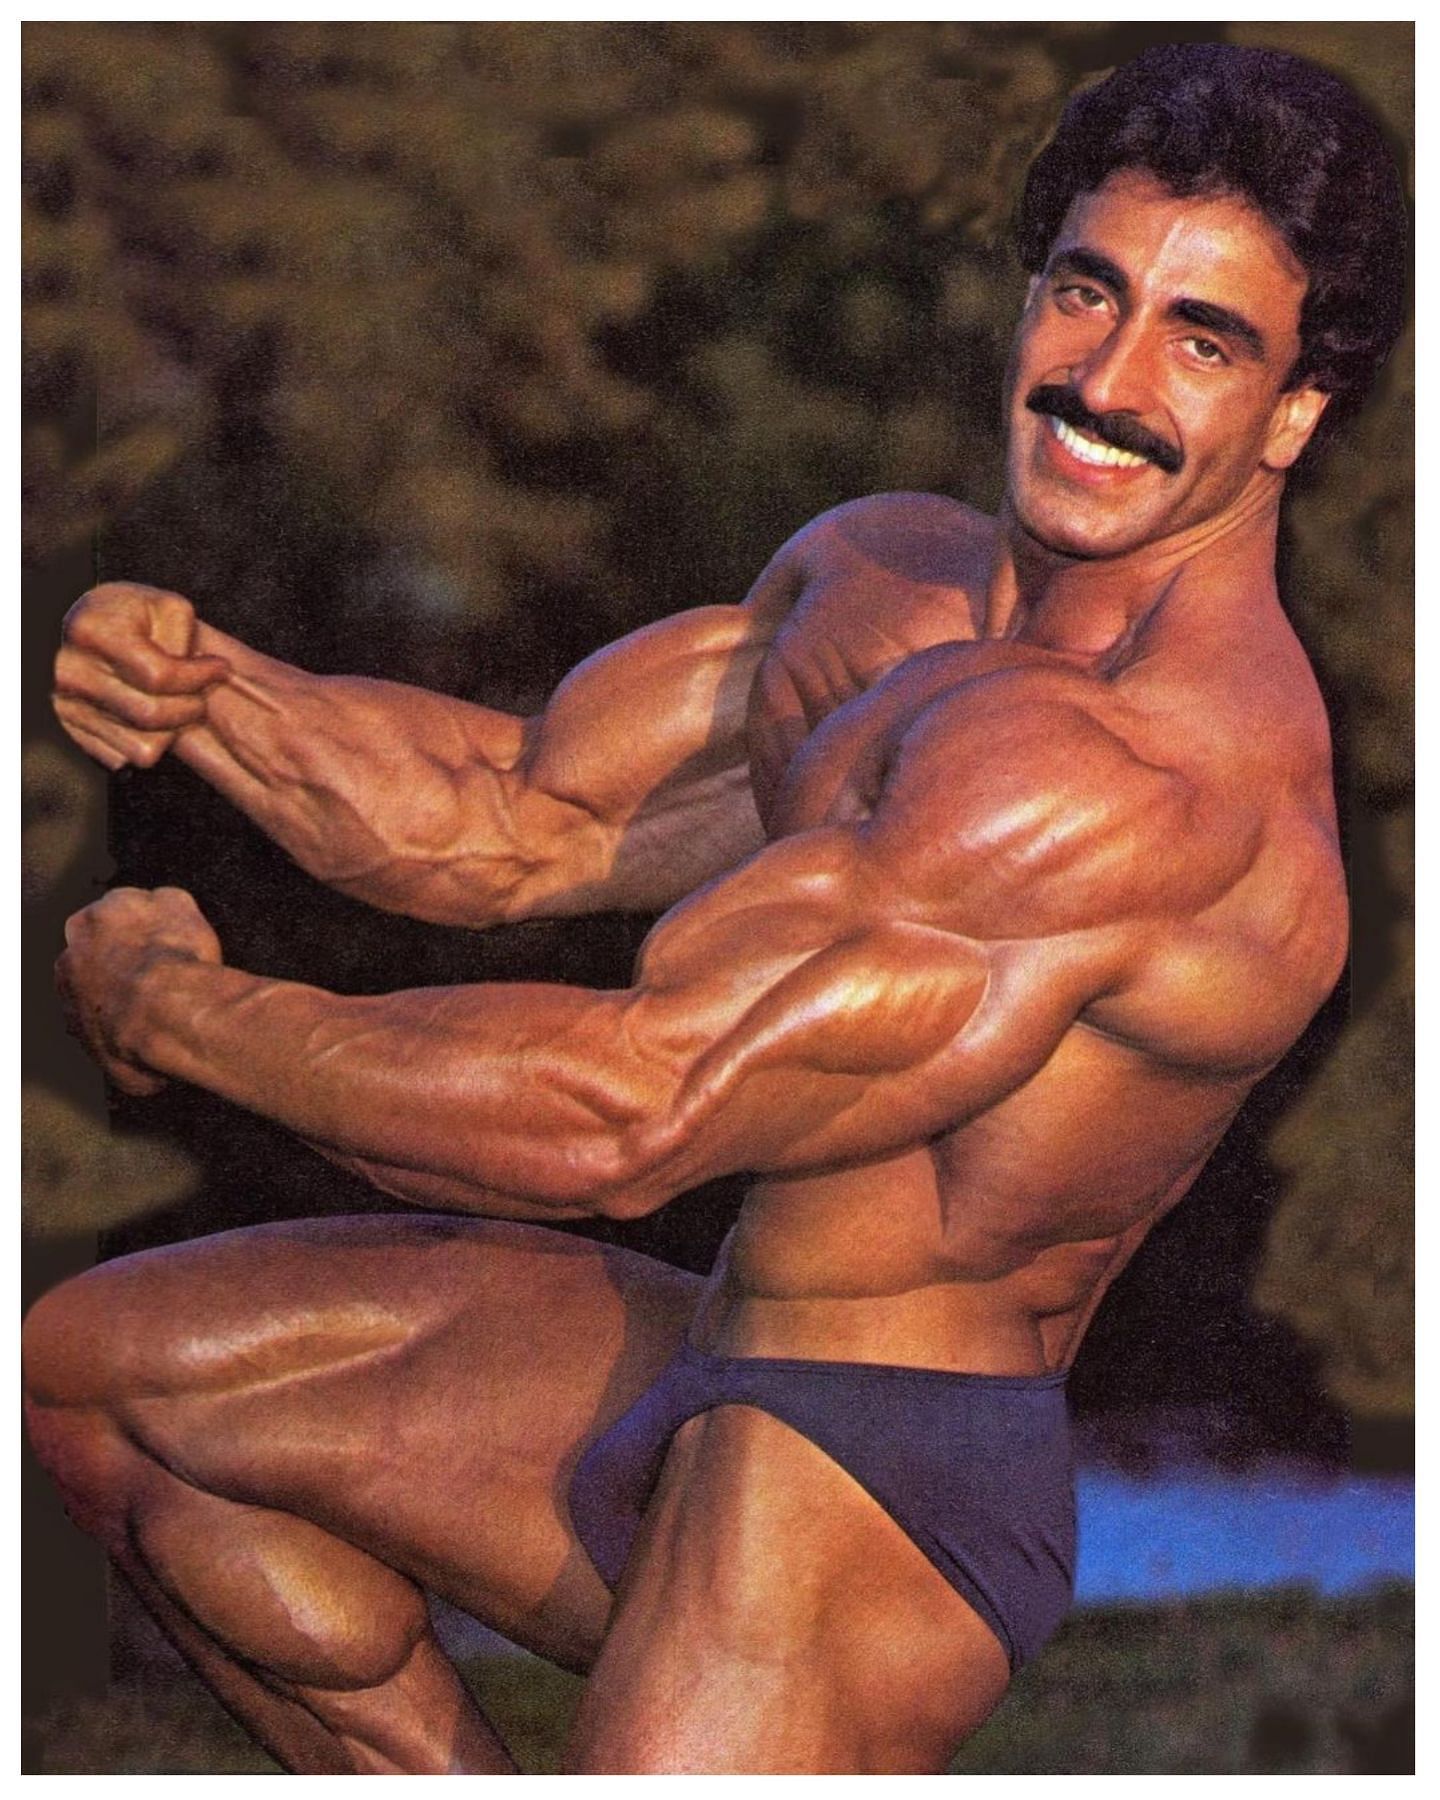 Bannout poses for the camera during his prime (Image via Instagram/@officialsamirbannout)